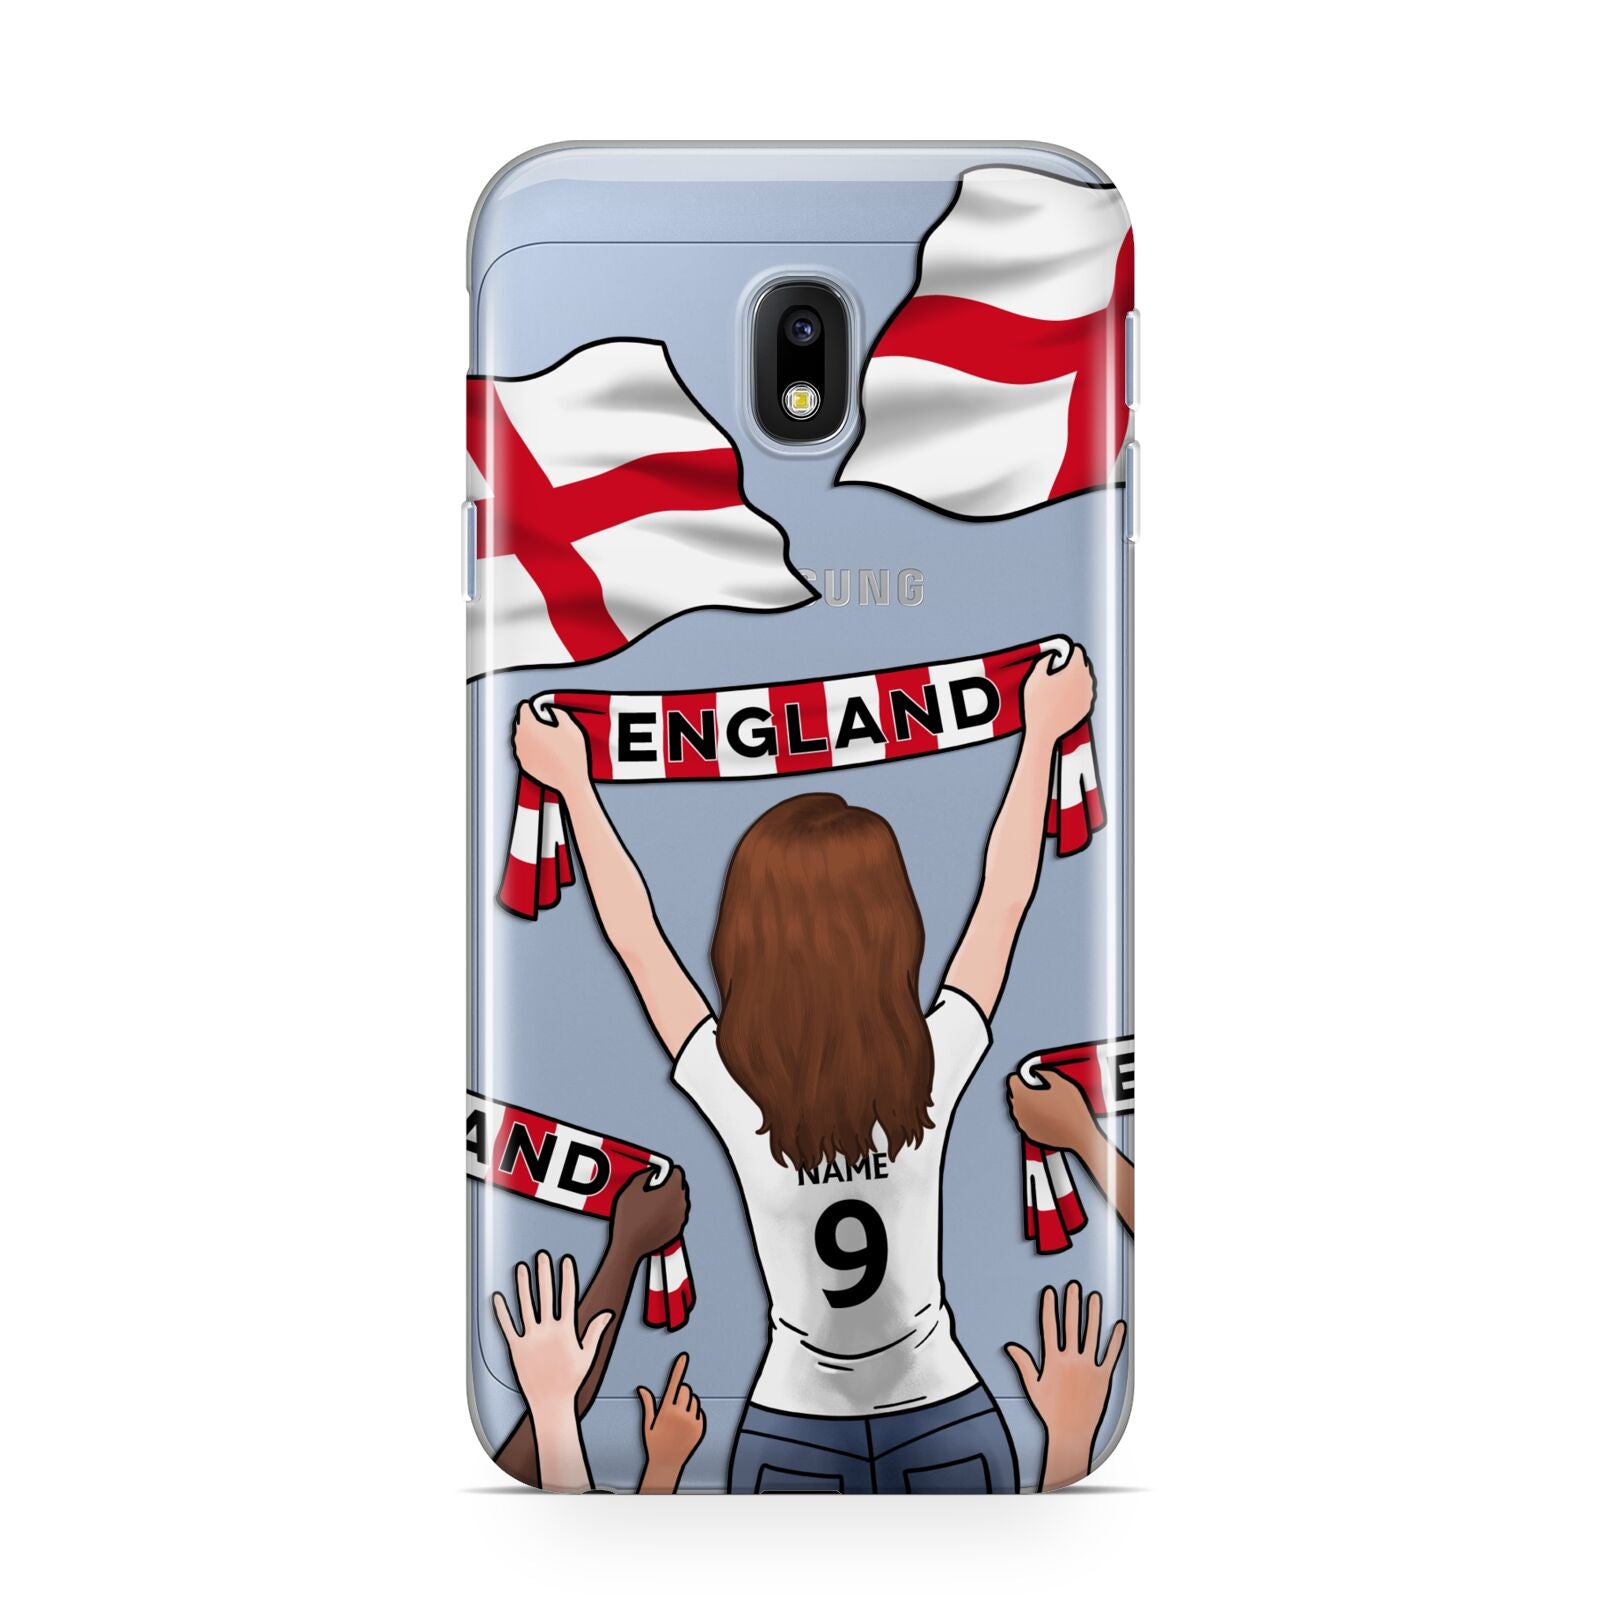 Football Supporter Personalised Samsung Galaxy J3 2017 Case